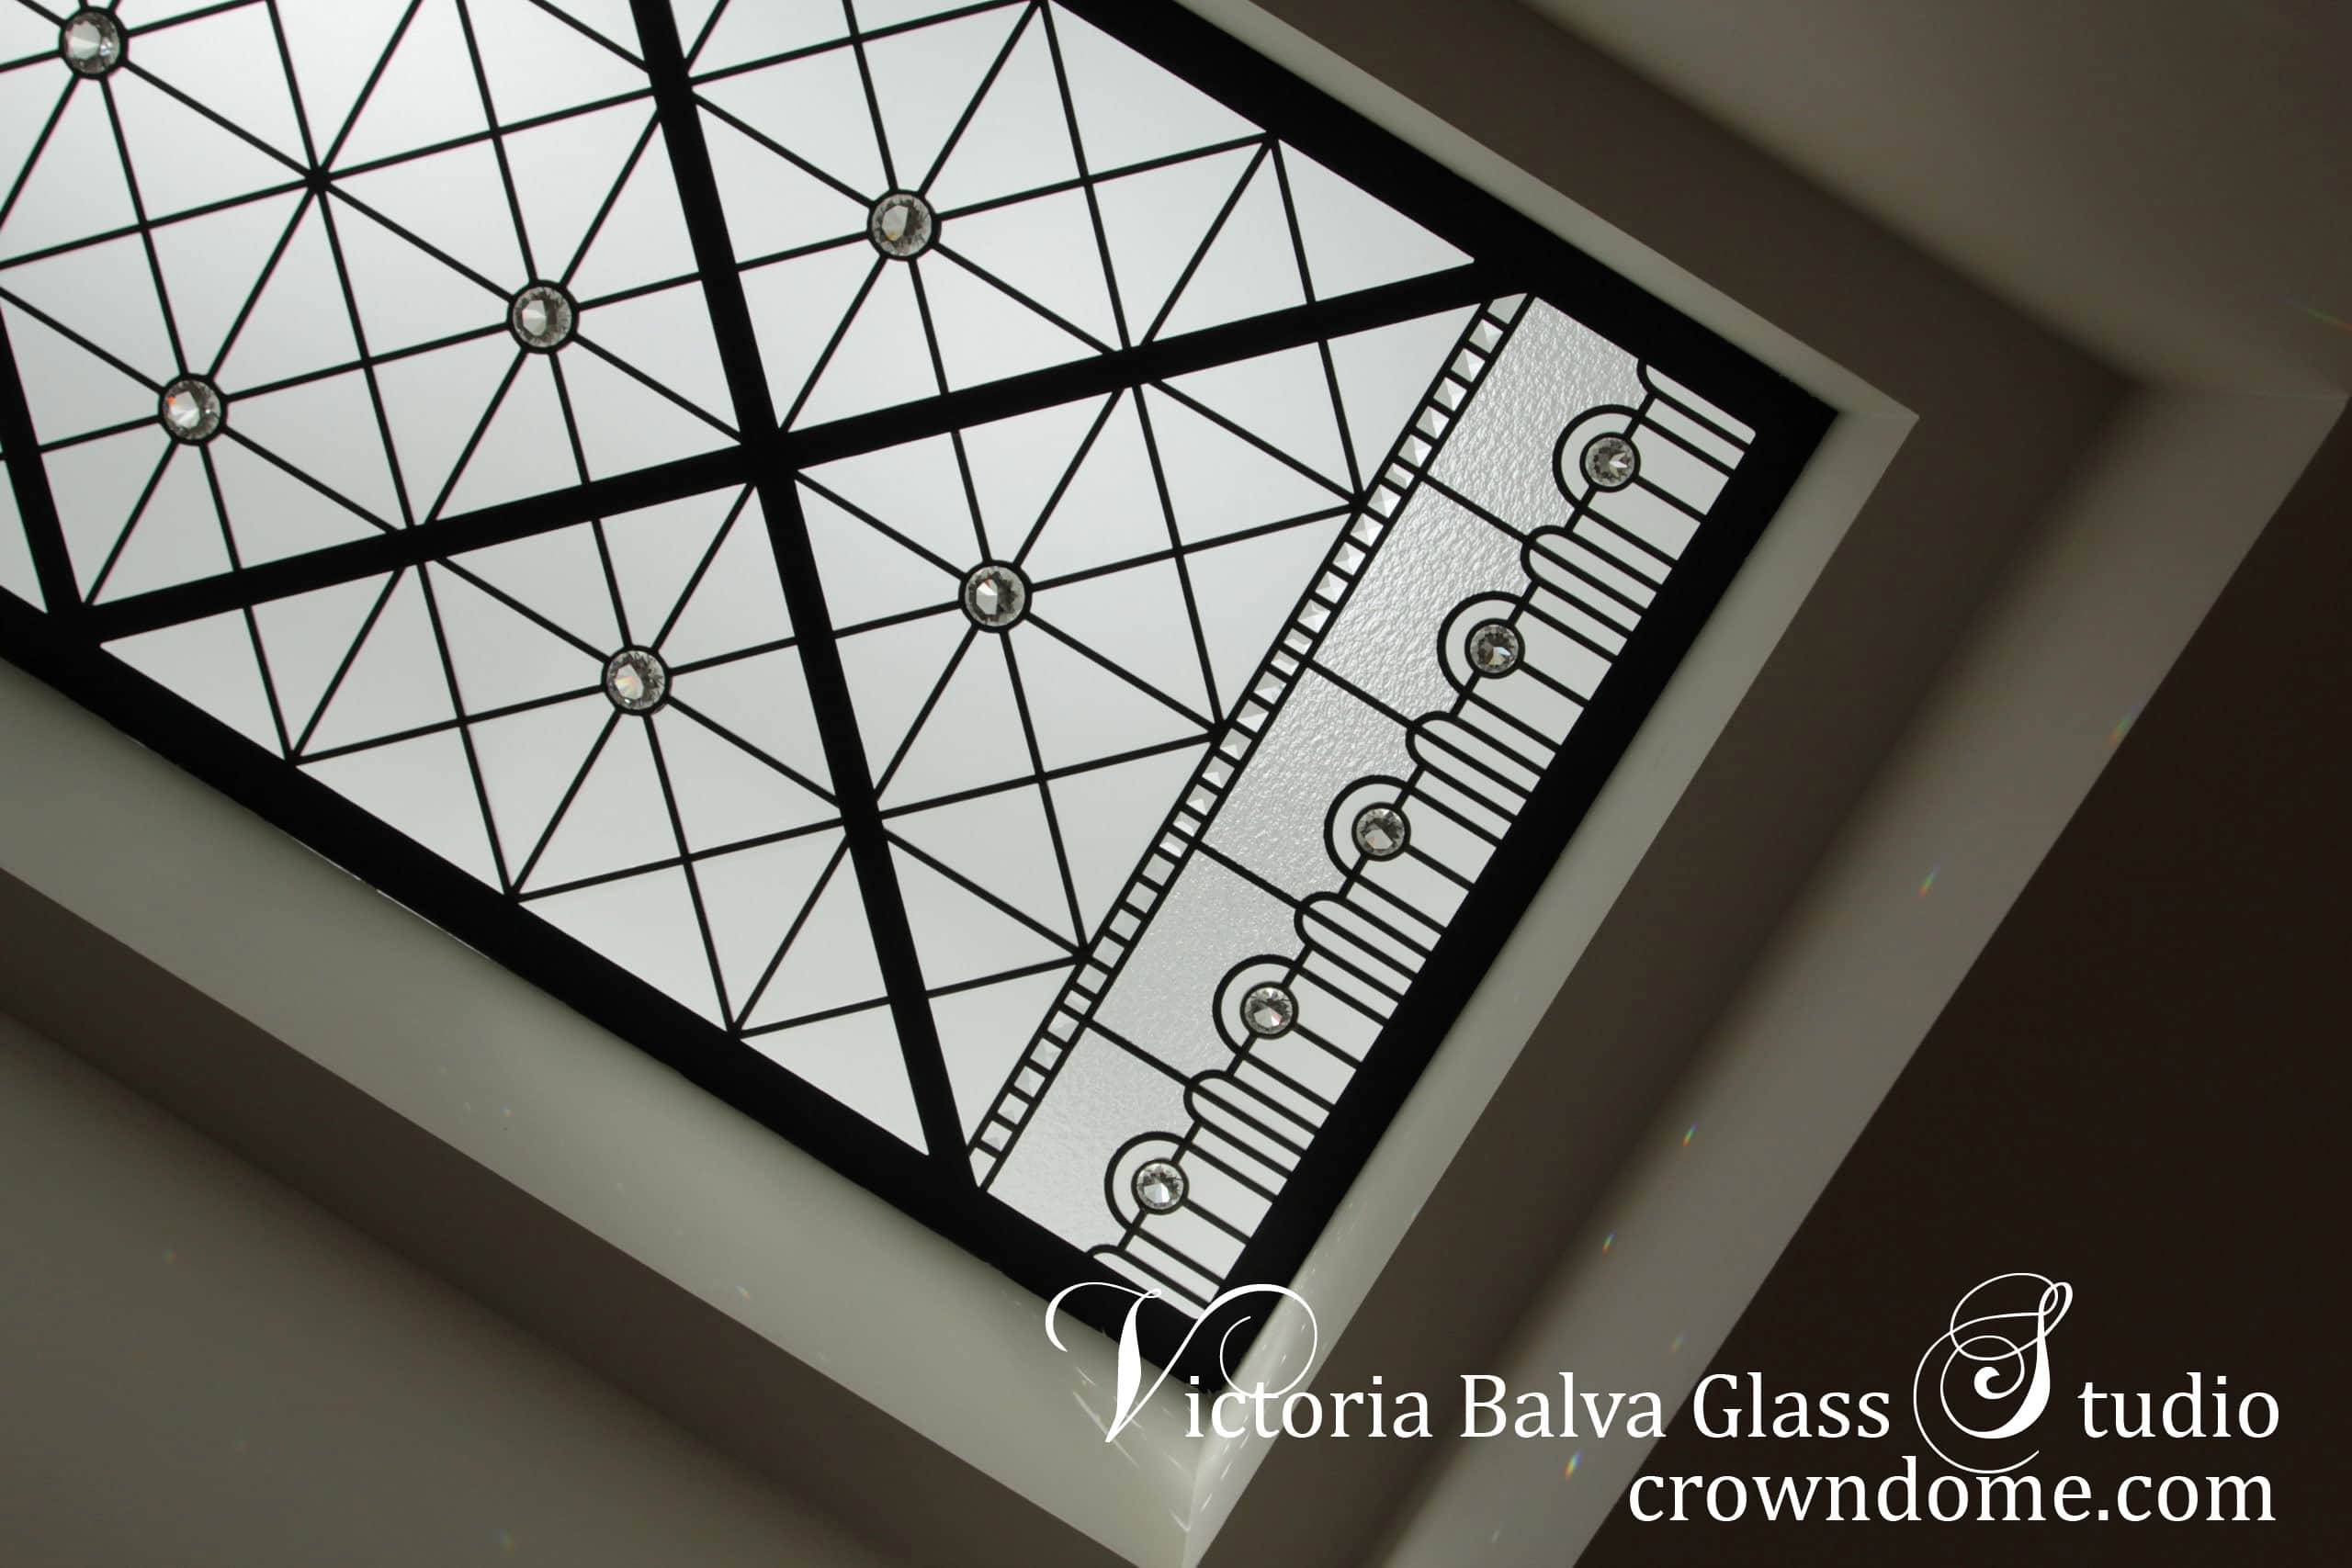 Simple geometric stained leaded glass skylight ceiling for a hallway of a luxury custom built residence with clear textured glasses, beveled glass and clear crystal jewels as accents. The contemporary minimal styling of the glass ceiling design brings modern feeling into space with a reference to a classic design reflecting a modern lifestyle of the residents. Leaded glass skylight design by stained glass artist Victoria Balva